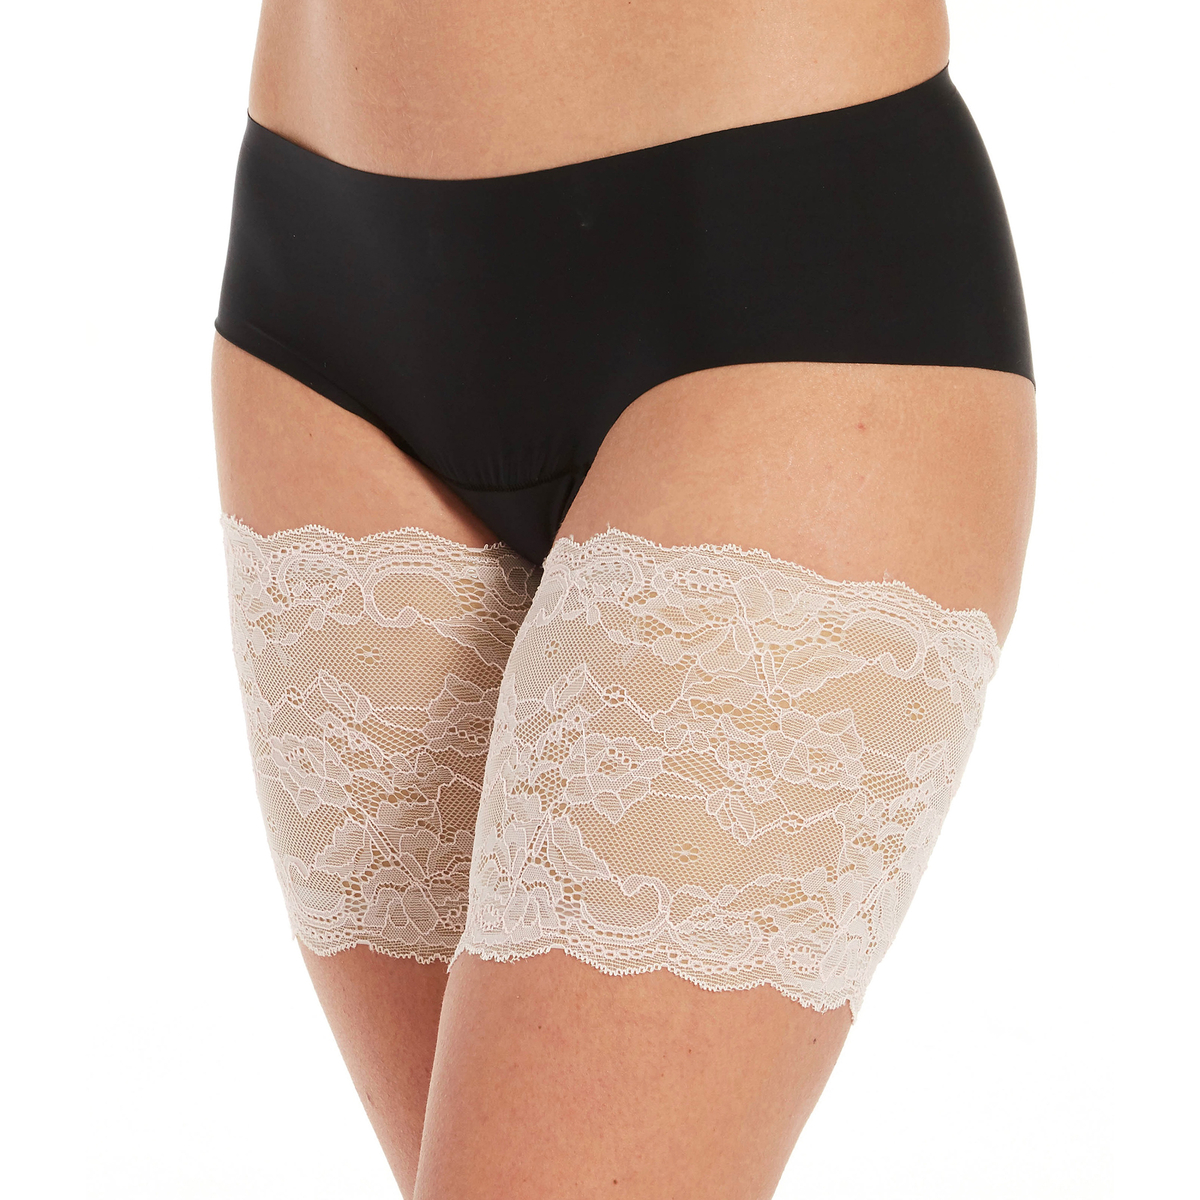 Anti-Chafing Thigh Bands in Lace